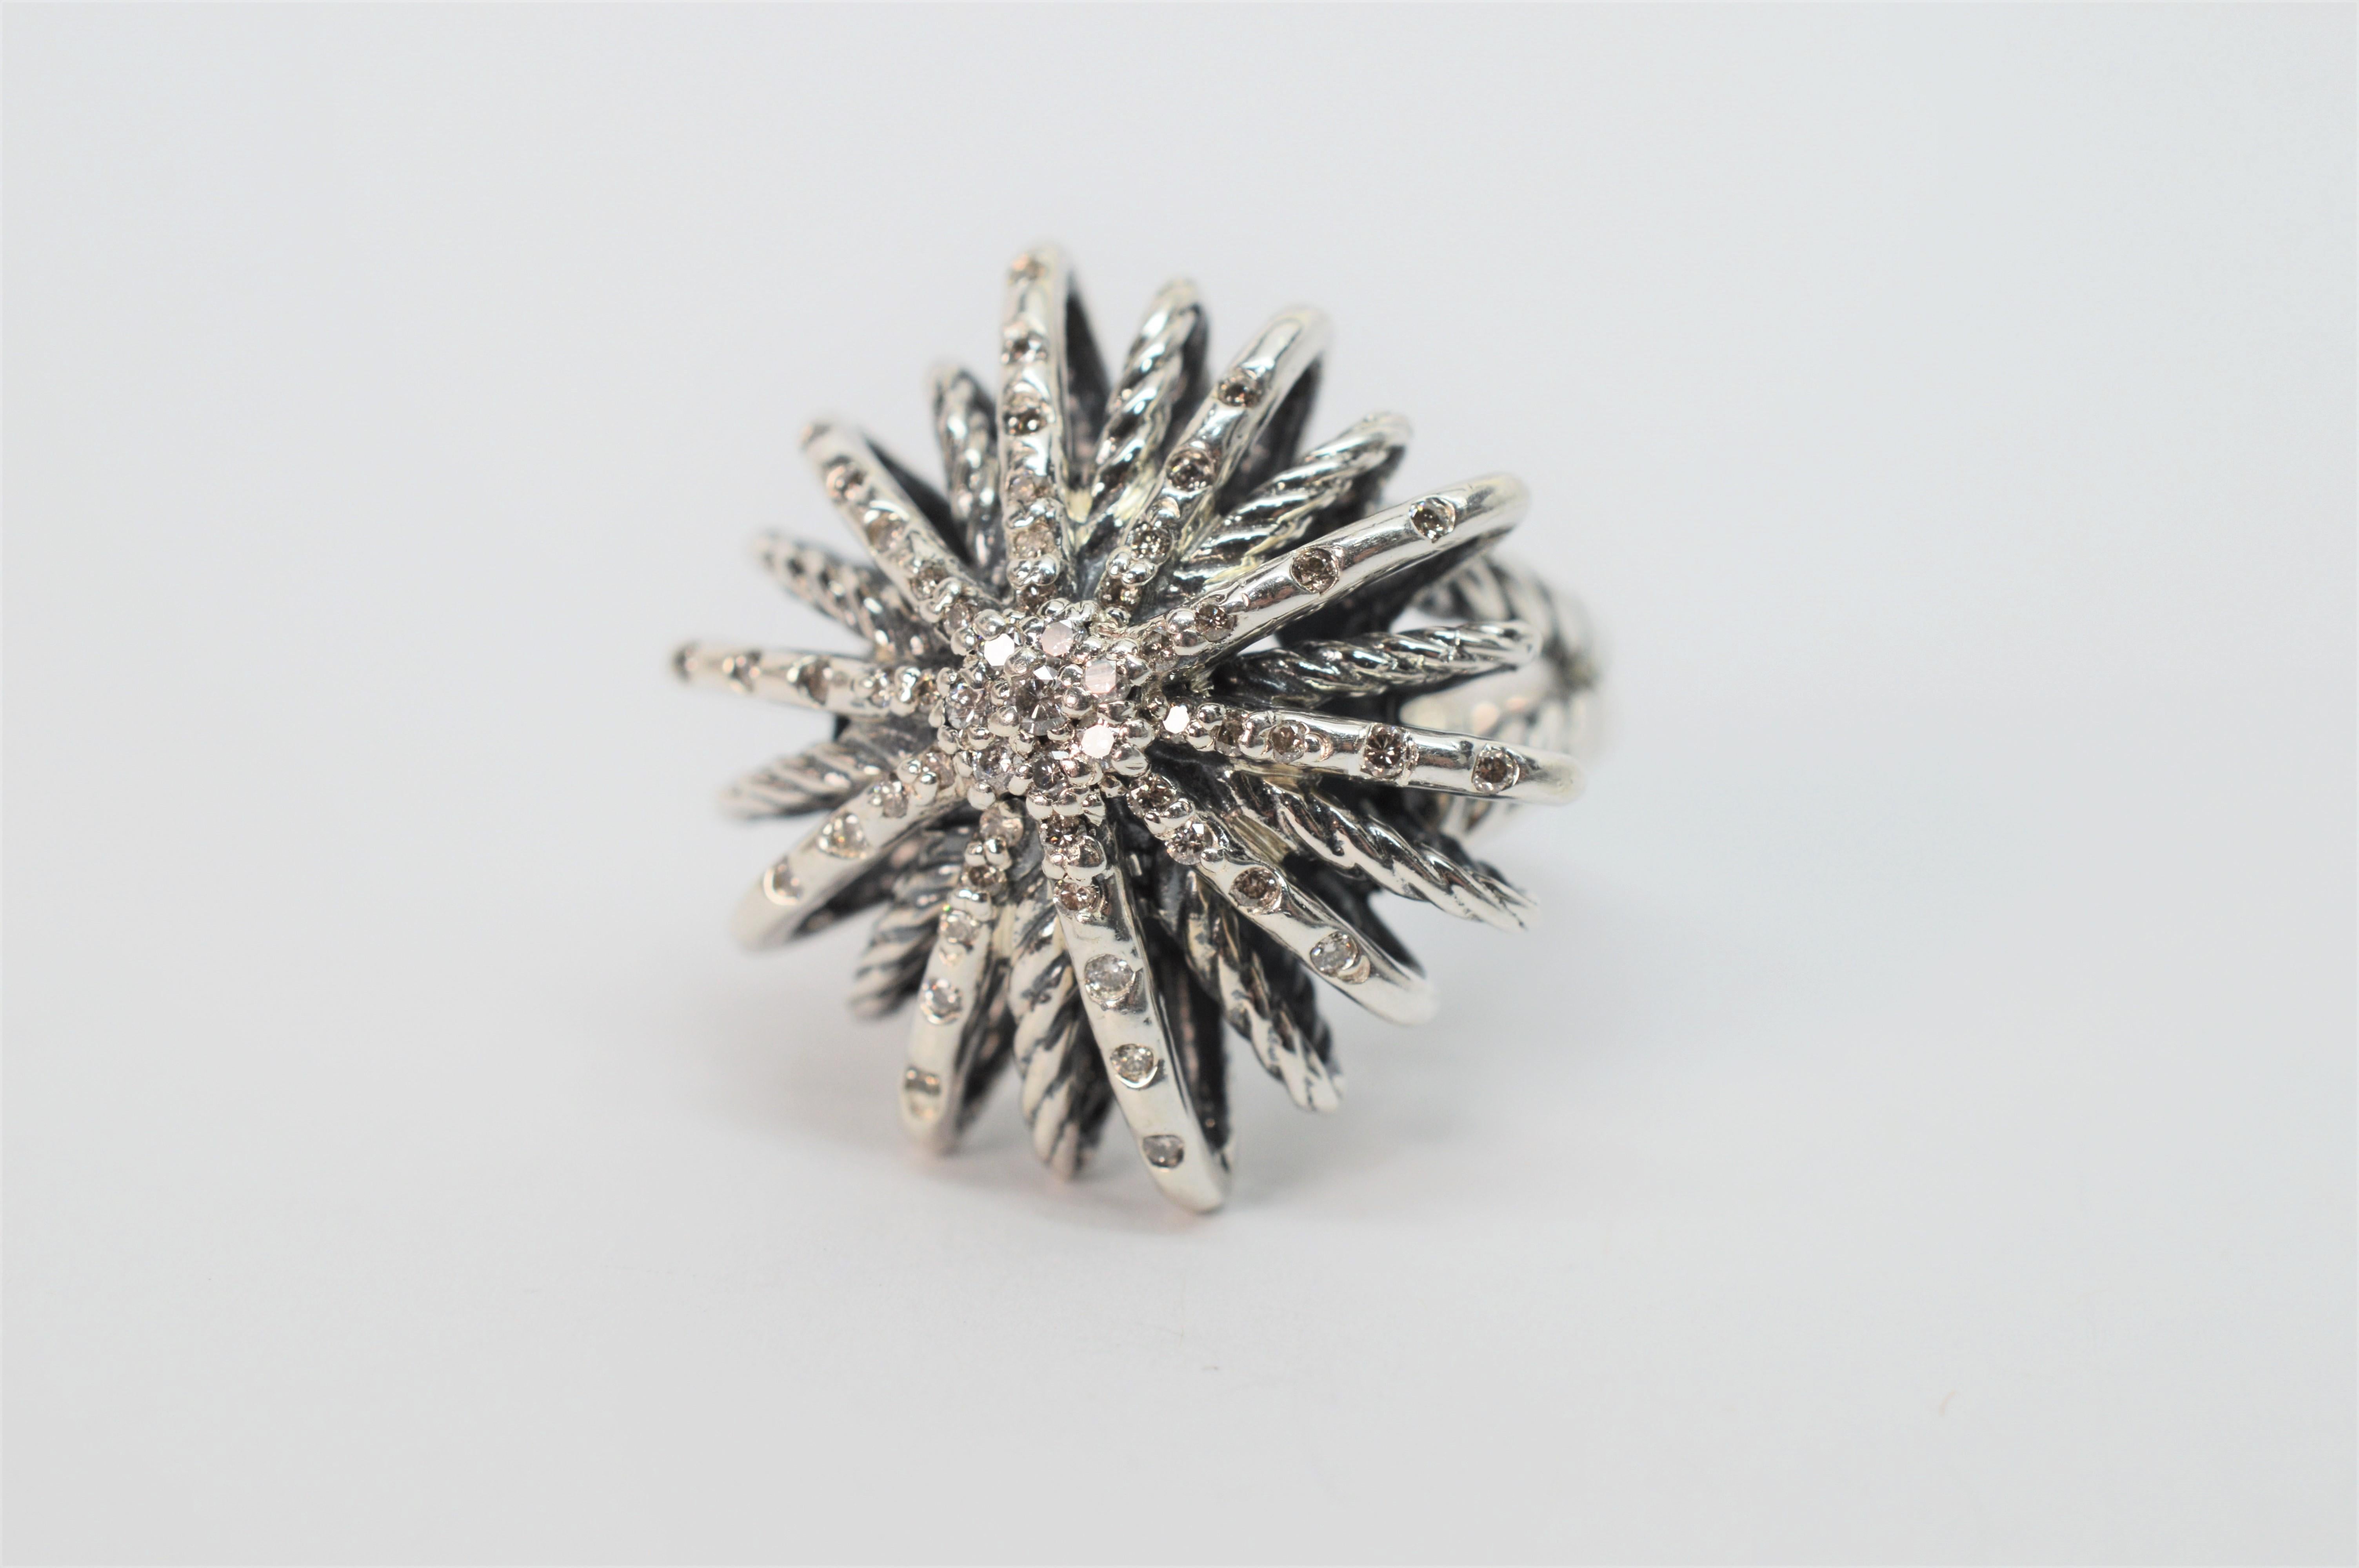 This flirty sterling cocktail ring from David Yurman's iconic Starburst Collection is said to be inspired by the designer's experience viewing fireworks in the Paris night sky.  The silver sprays are accented with an estimated .50 carats of diamonds